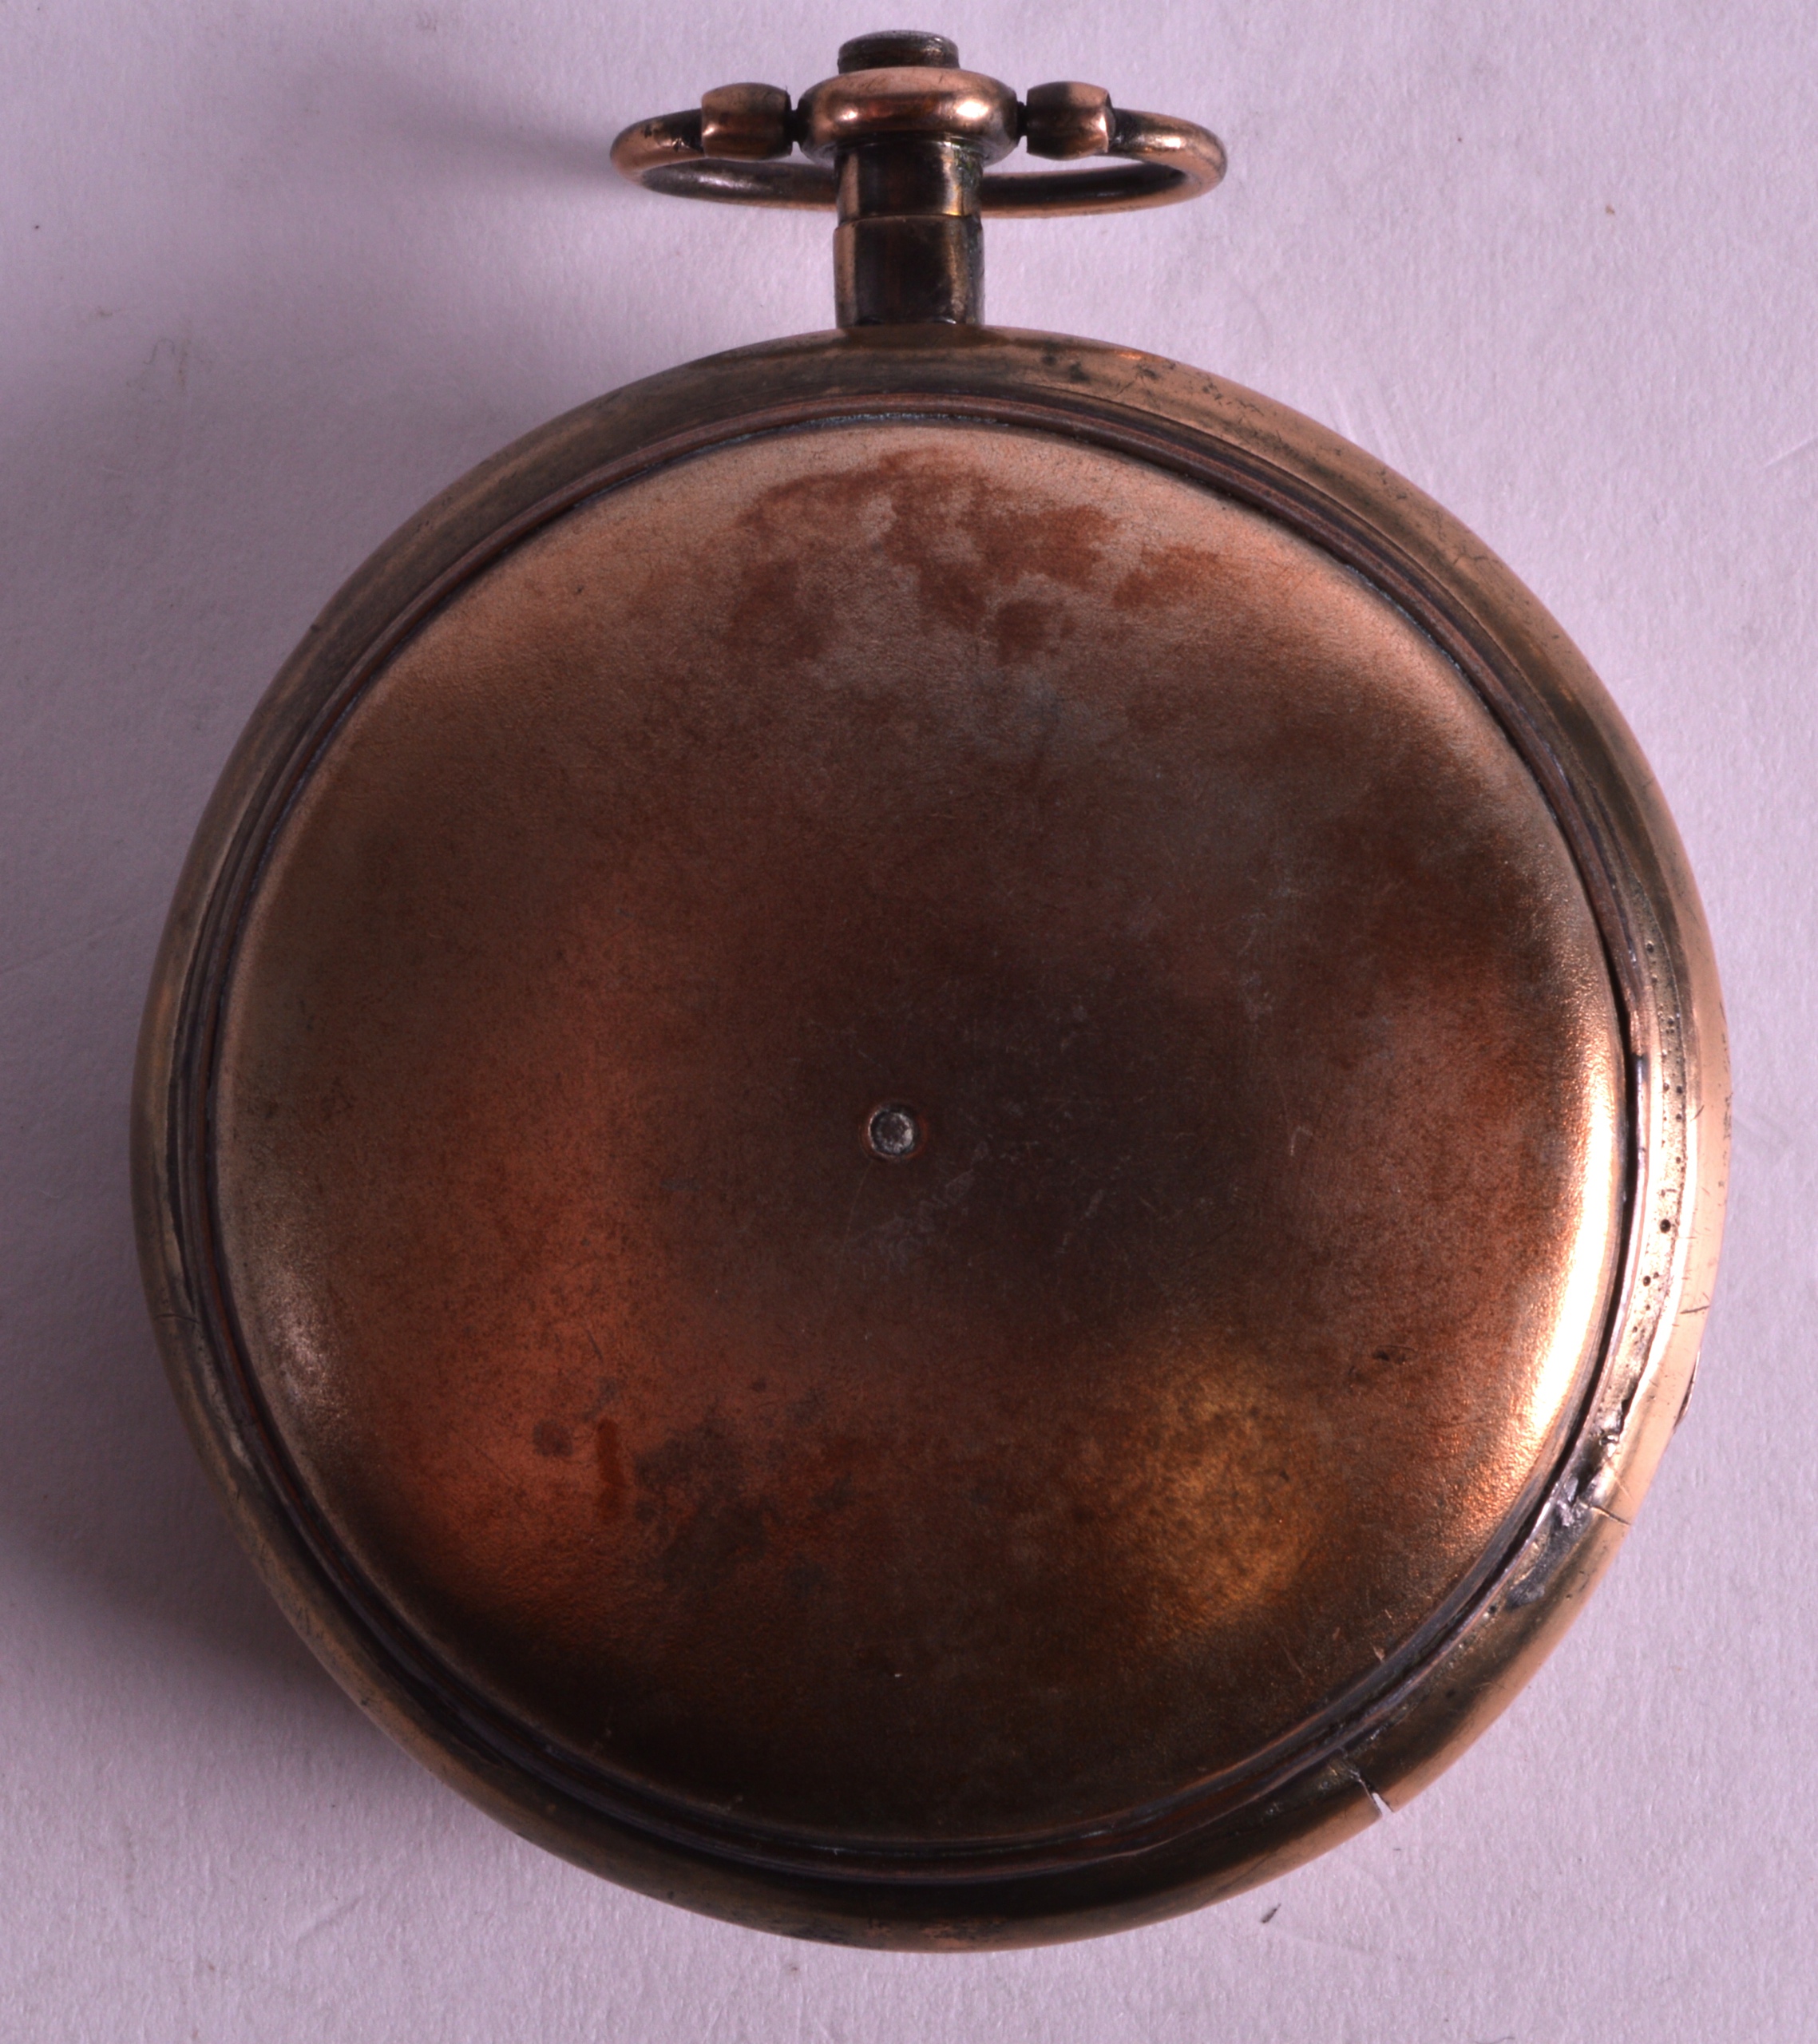 AN 18TH/19TH CENTURY SILVER BREGUET REPEATING POCKET WATCH with white enamel dial and black - Image 2 of 3